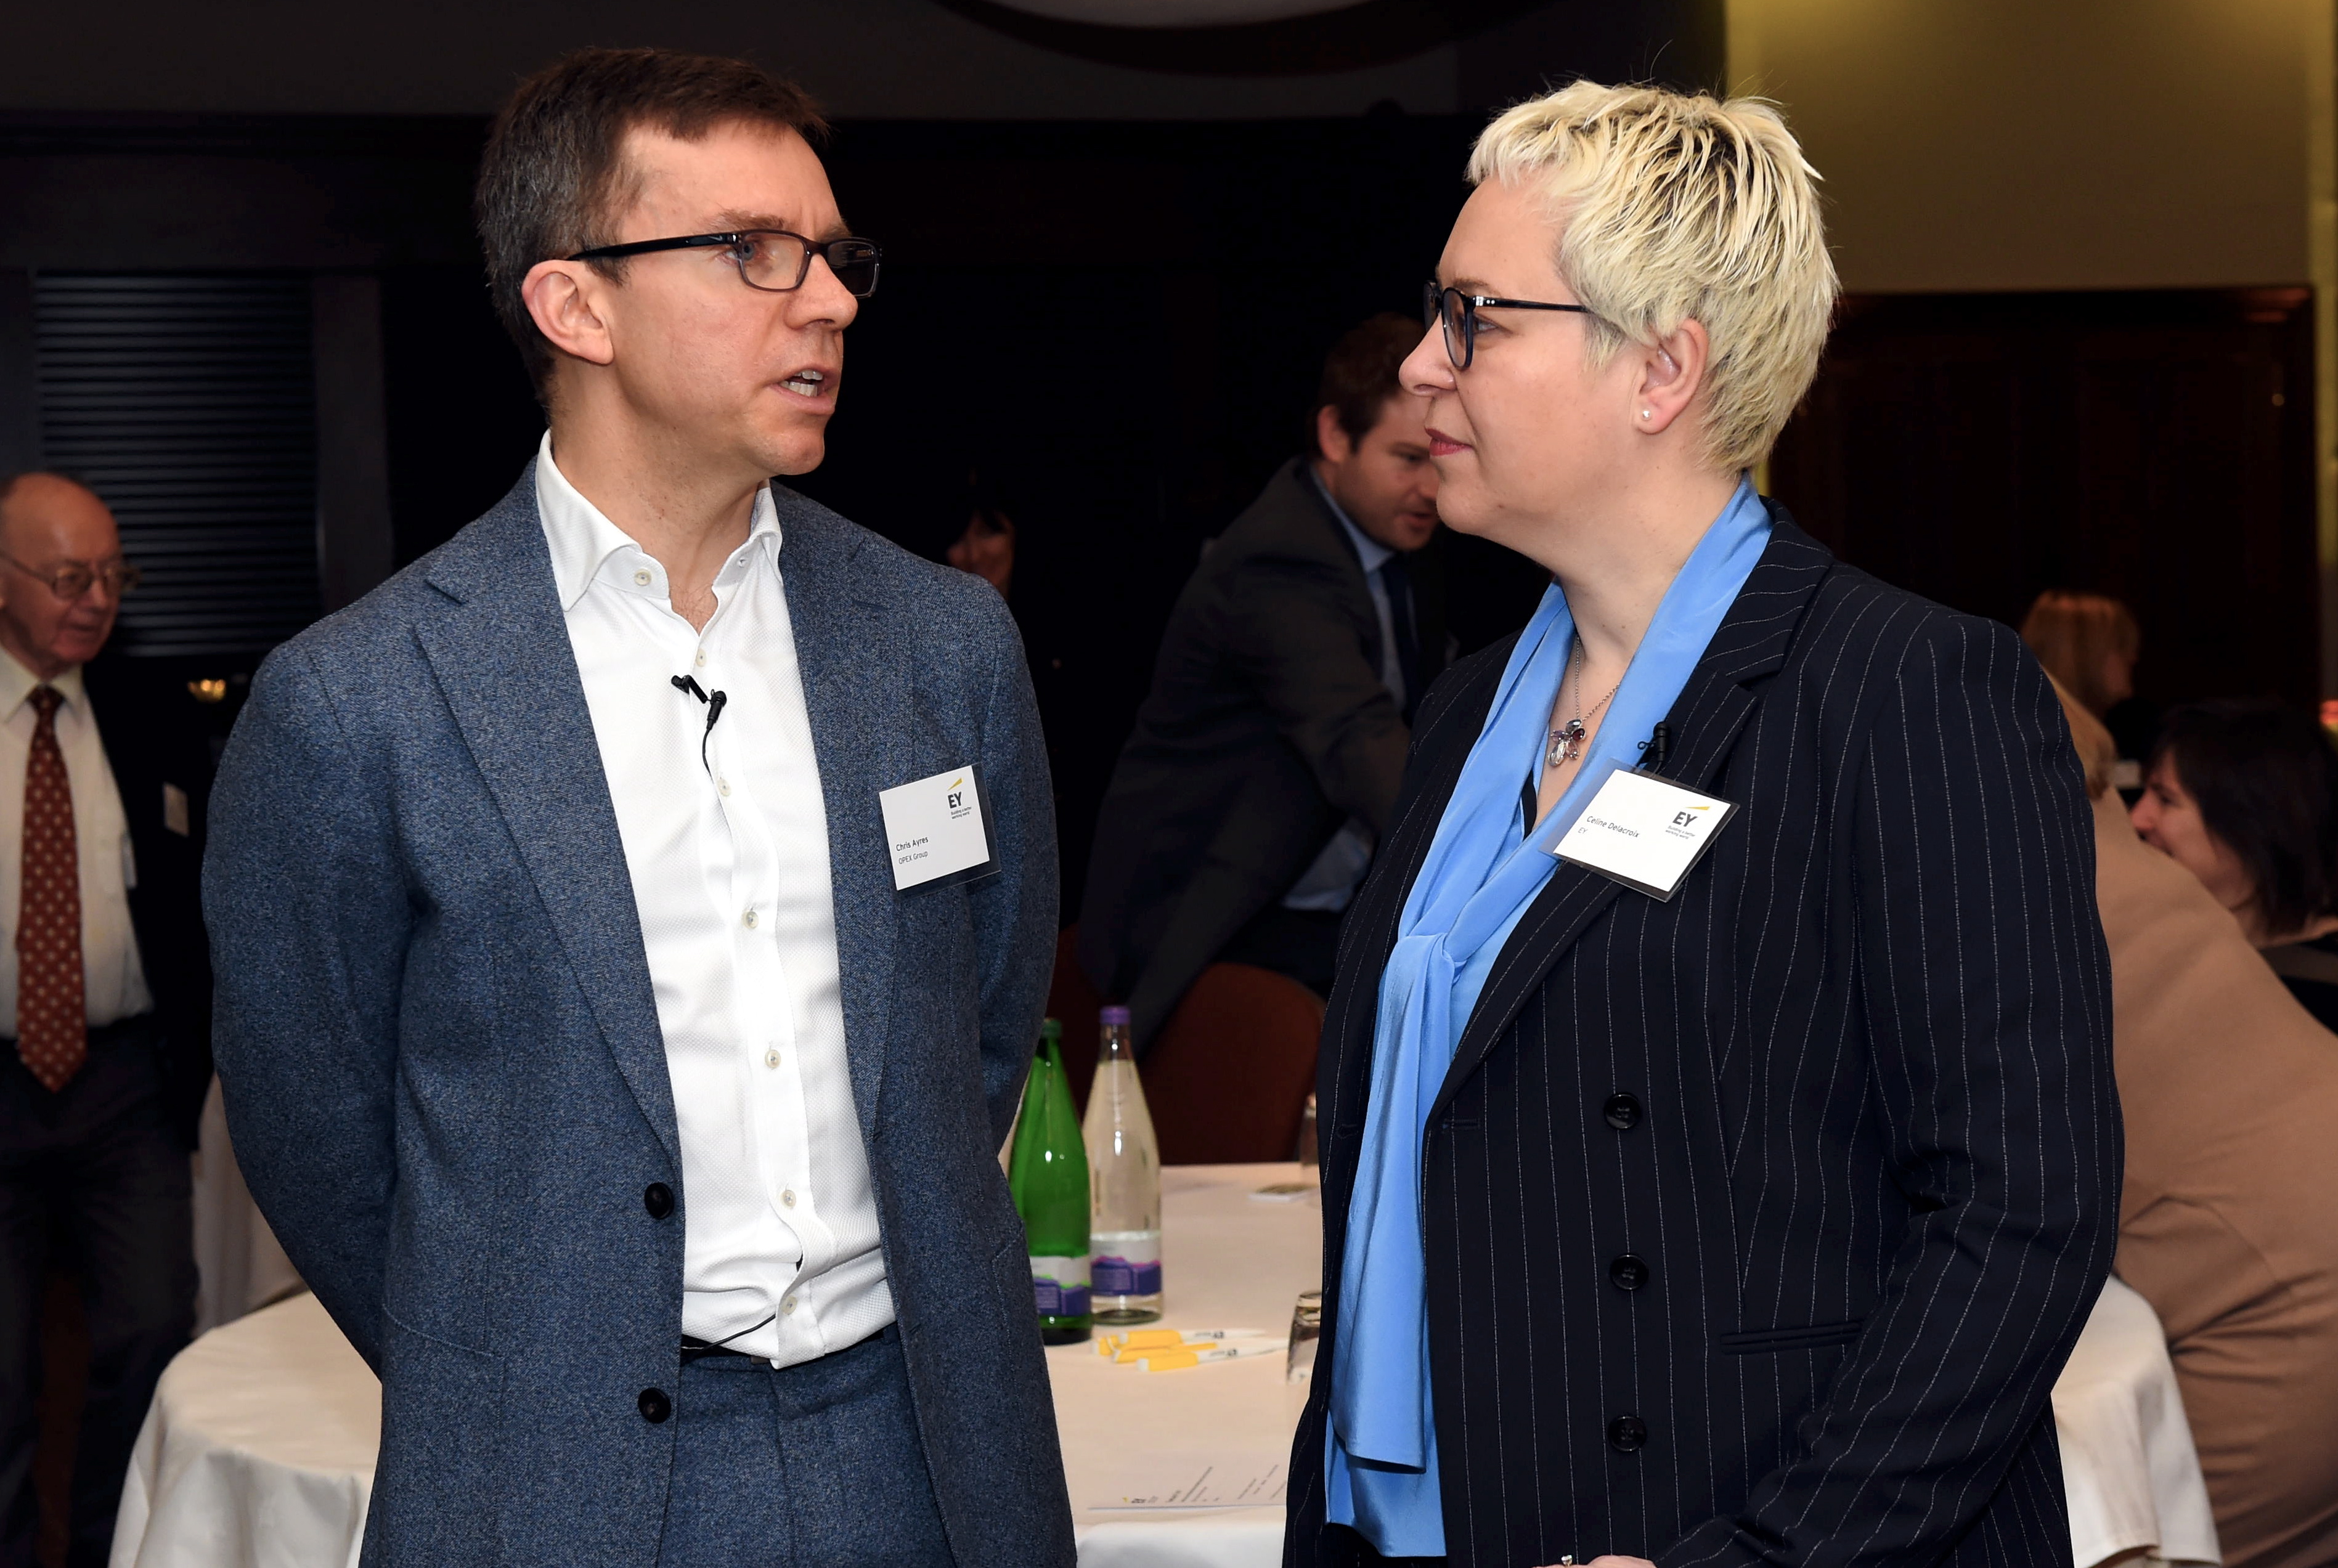 EY launching annual UK oilfield services report.
Pictured are Chris Ayres, OPEX Group and  Celine Delacroix, EY.
06/02/19
Picture by HEATHER FOWLIE